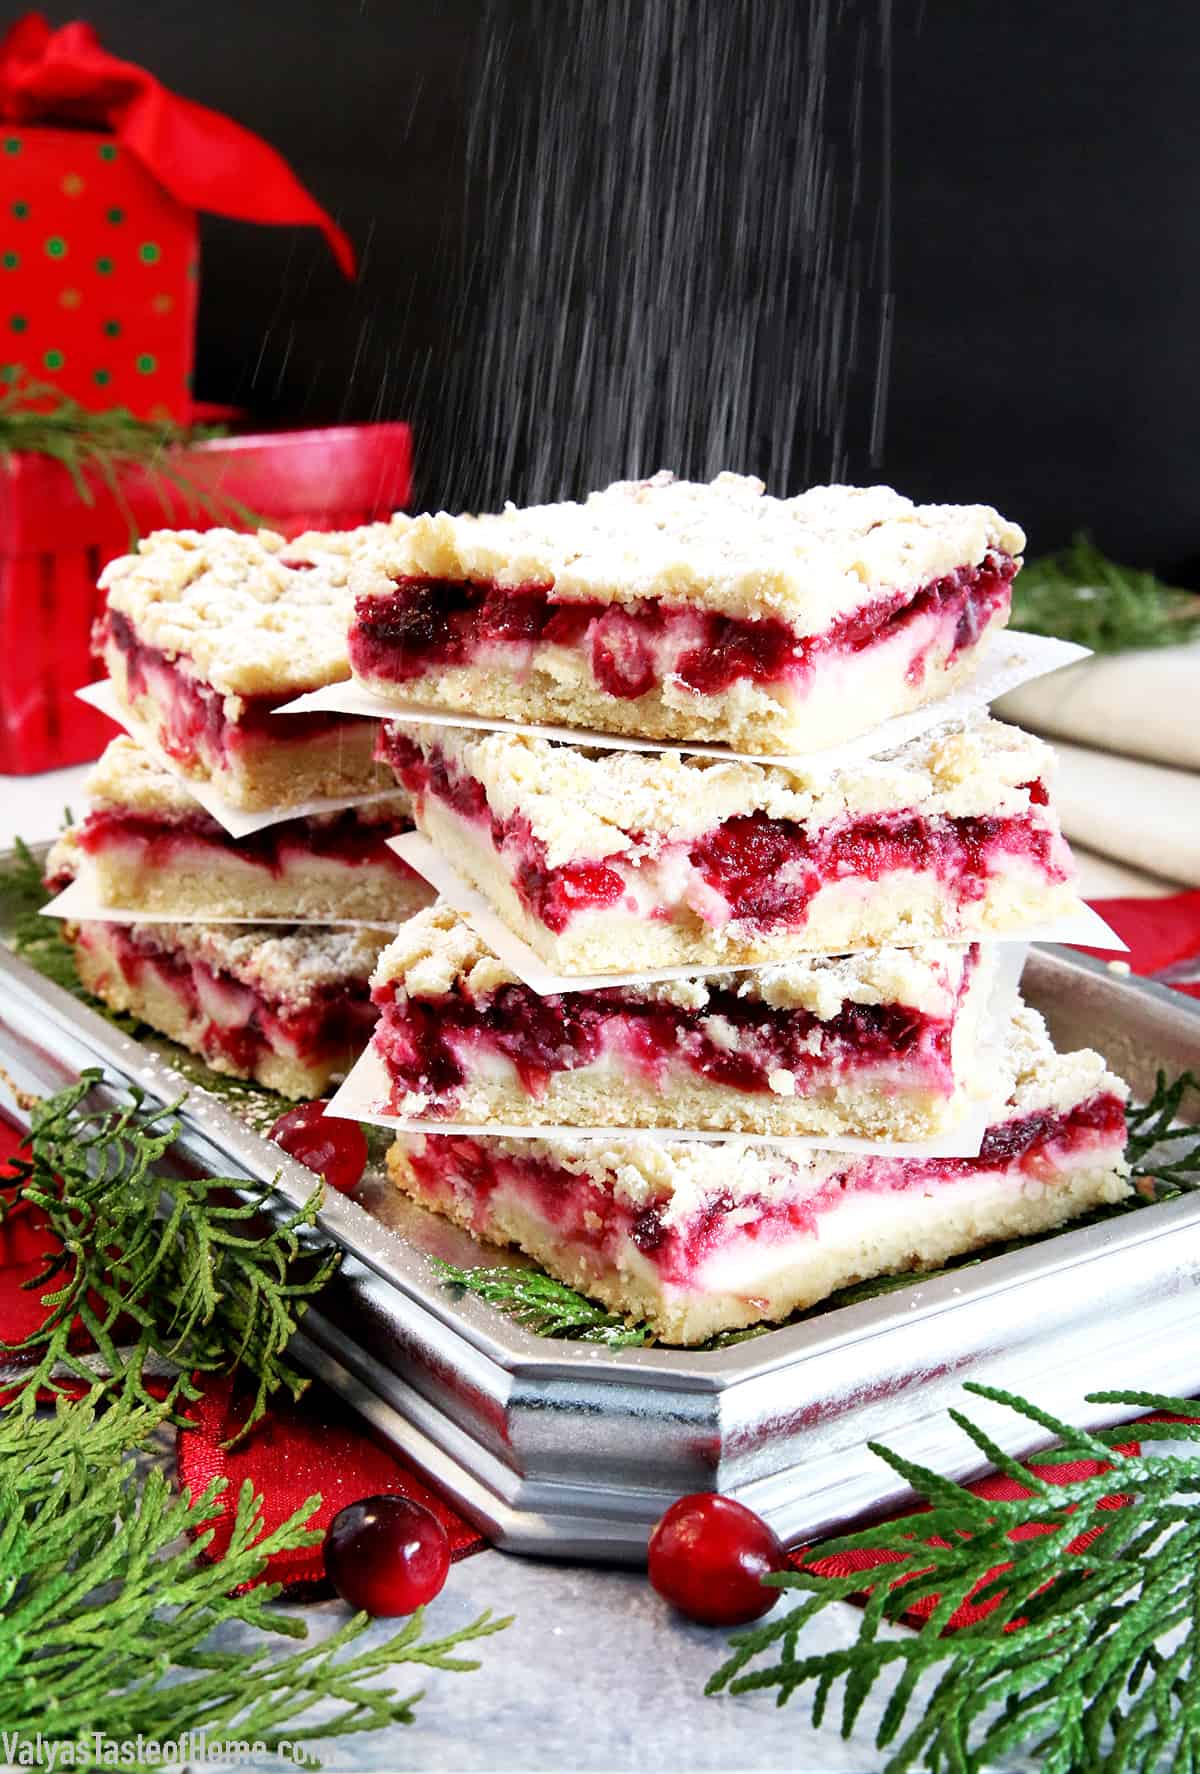 There's no treat like cranberries for Christmas! Couple that with sweet cream cheese and you've really got something delicious. Another great treat just in time for the Holidays. These Cream Cheese Cranberry Bars are very easy to make and are absolutely delightful! #cranberrybars #creamcheesecranberrybars #holidaybaking #valyastasteofhome